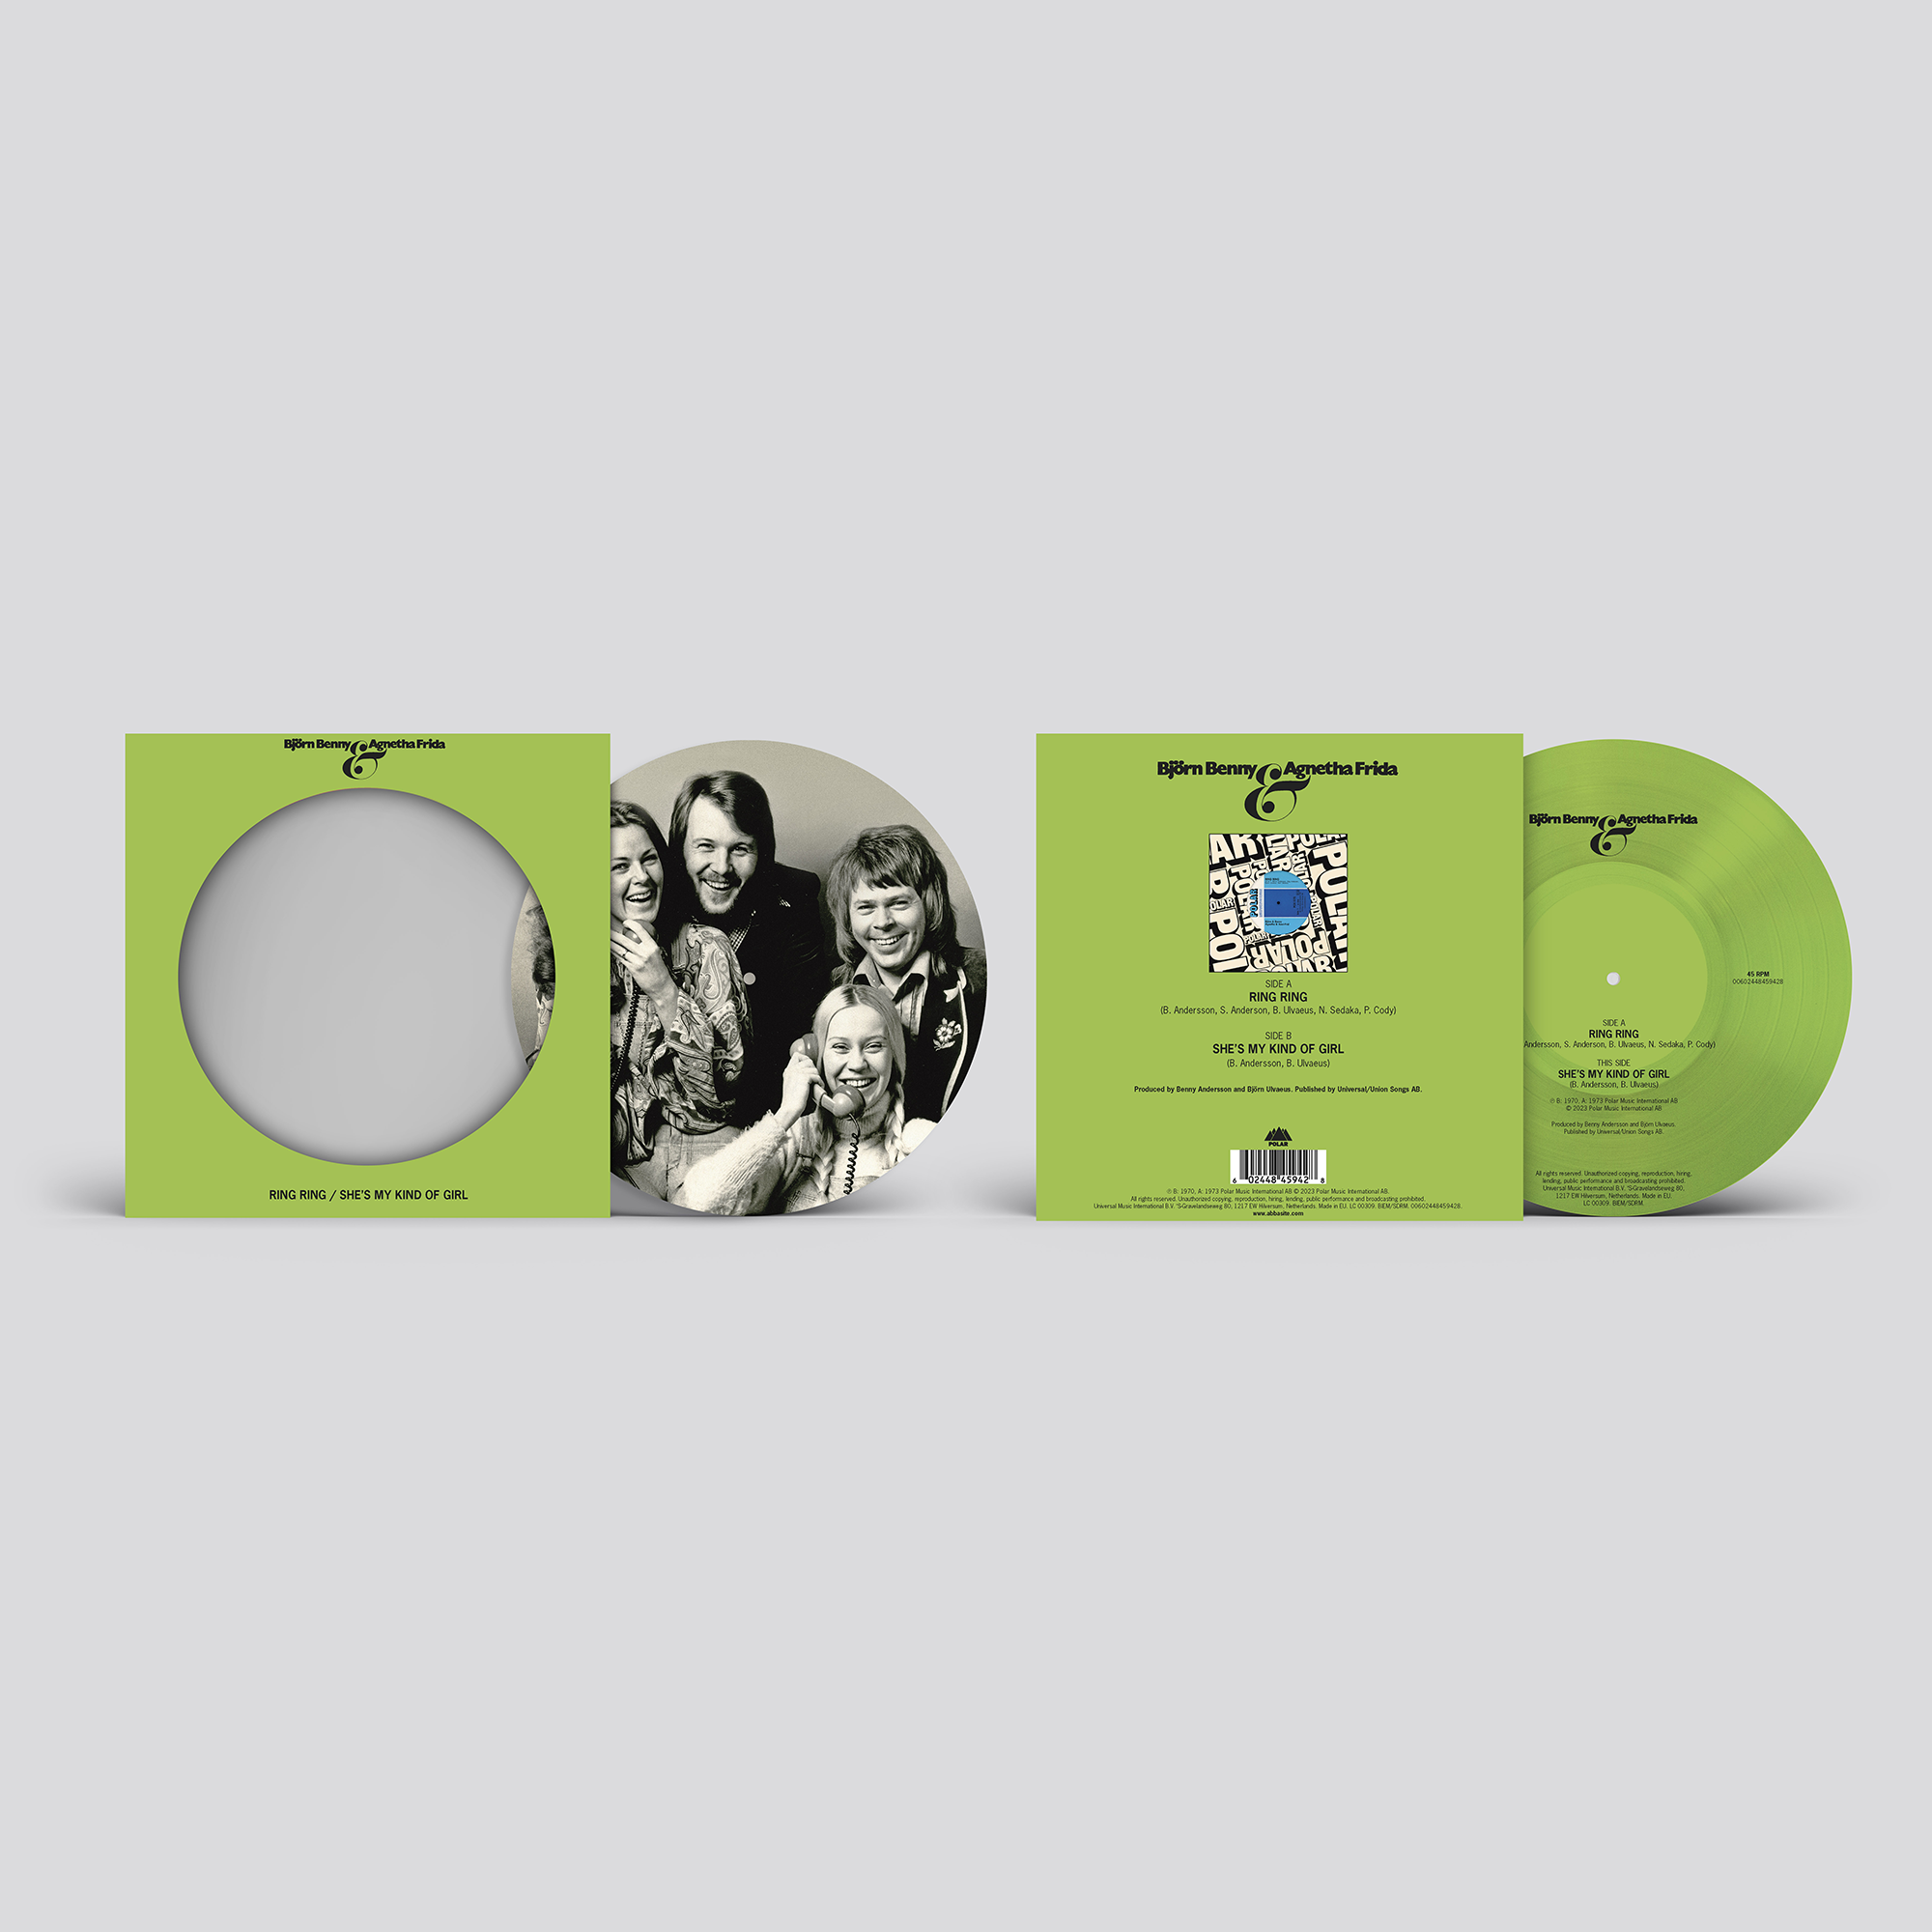 Ring Ring (English)/ She’s My Kind of Girl 7″ Picture Disc Single (Limited Edition) Packshot